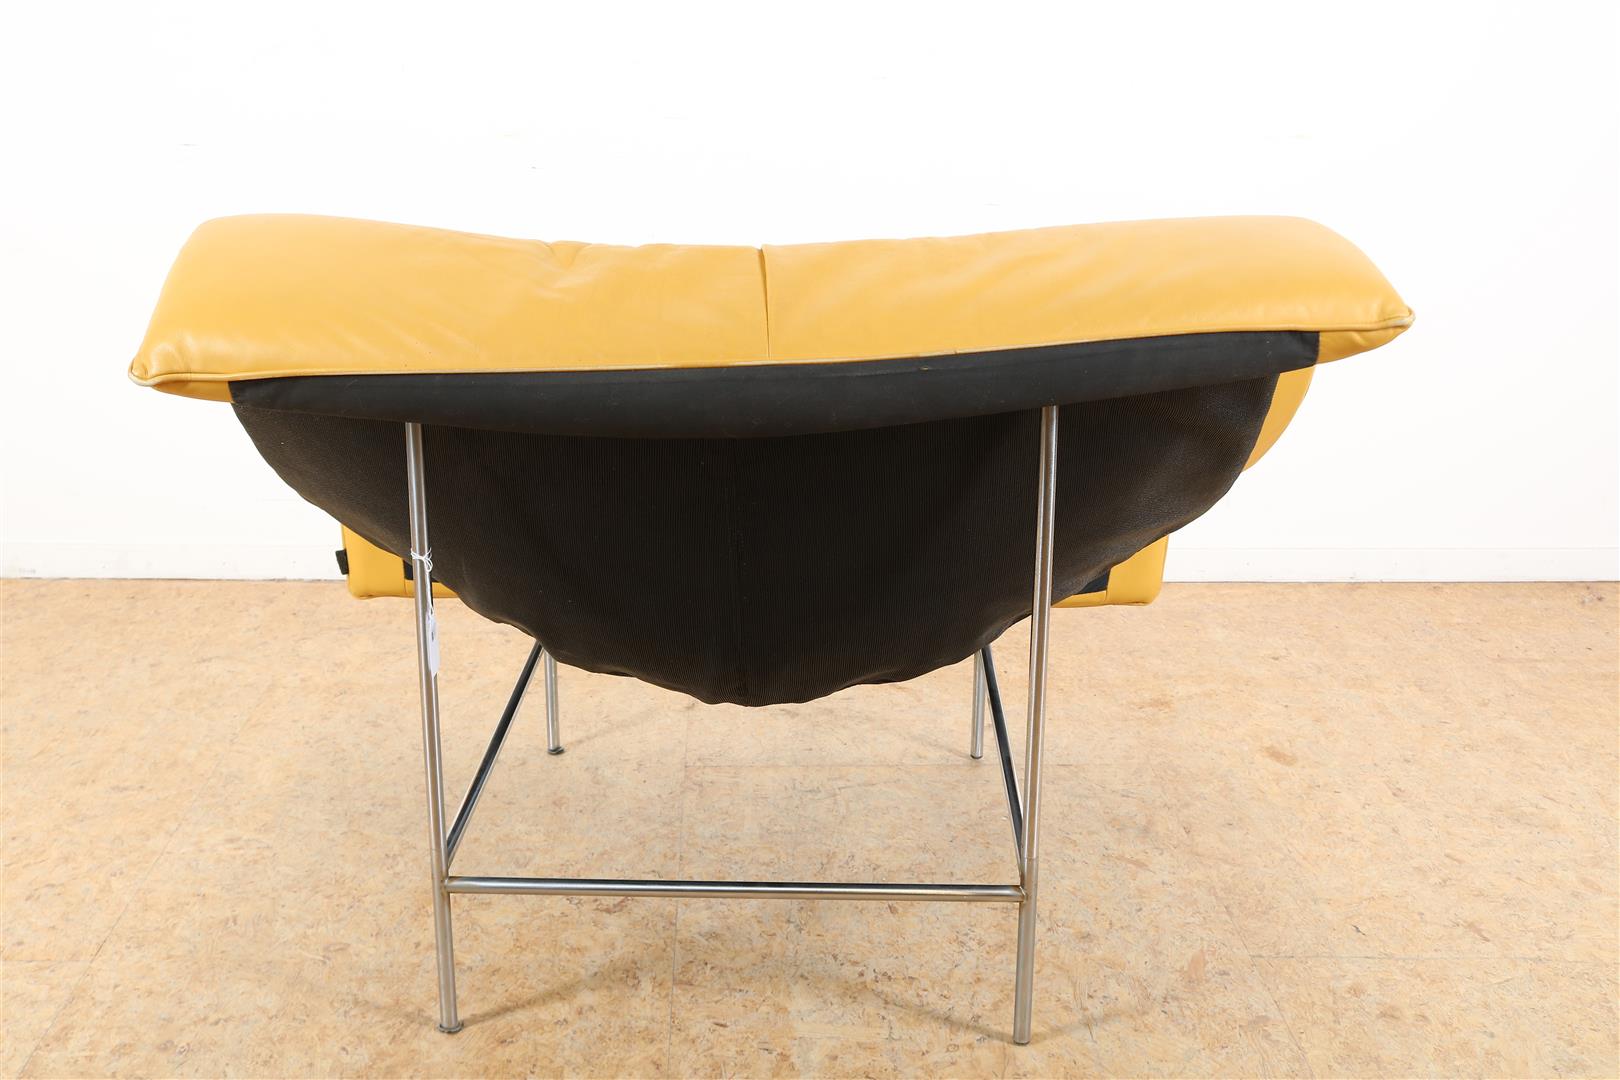 Chrome-plated design chair with yellow leather cushion, designer Gerard van den Berg for Montis, - Image 3 of 5